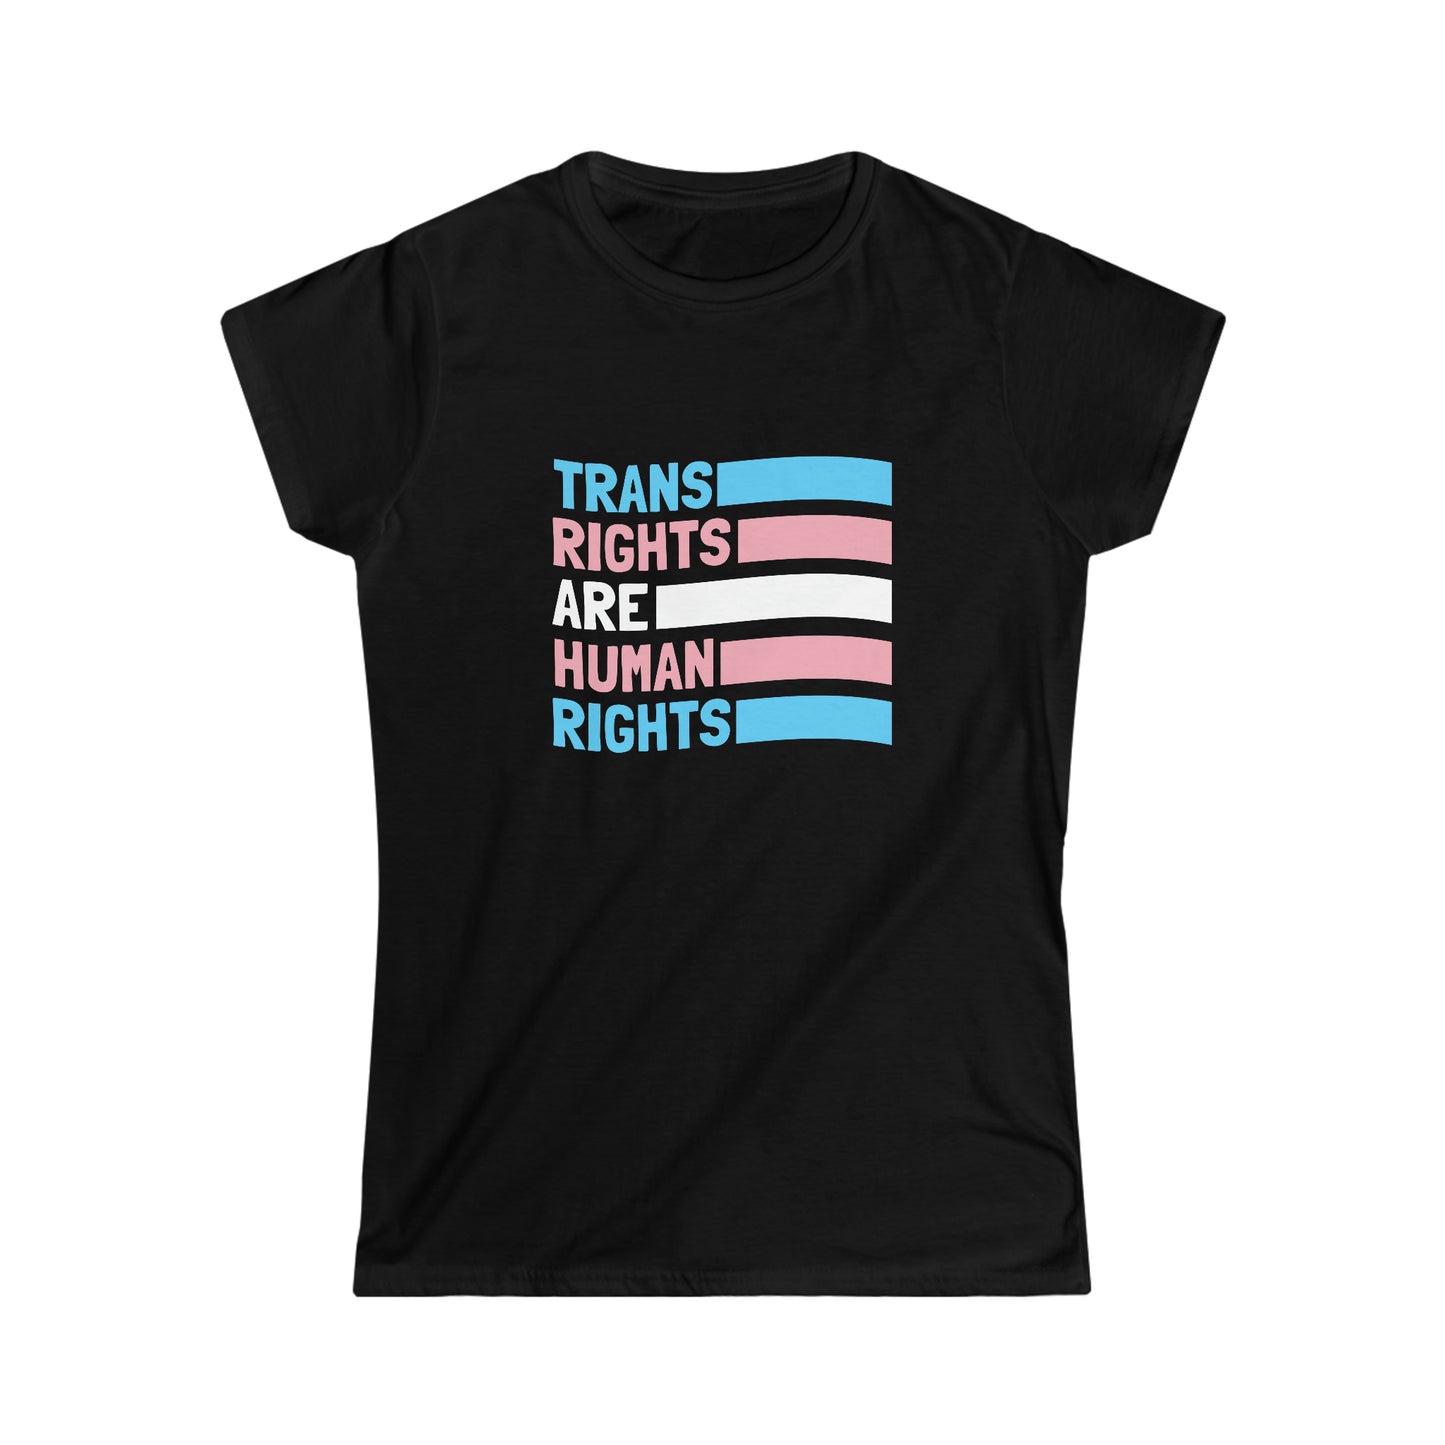 “Trans Rights Are Human Rights” Women’s T-Shirts